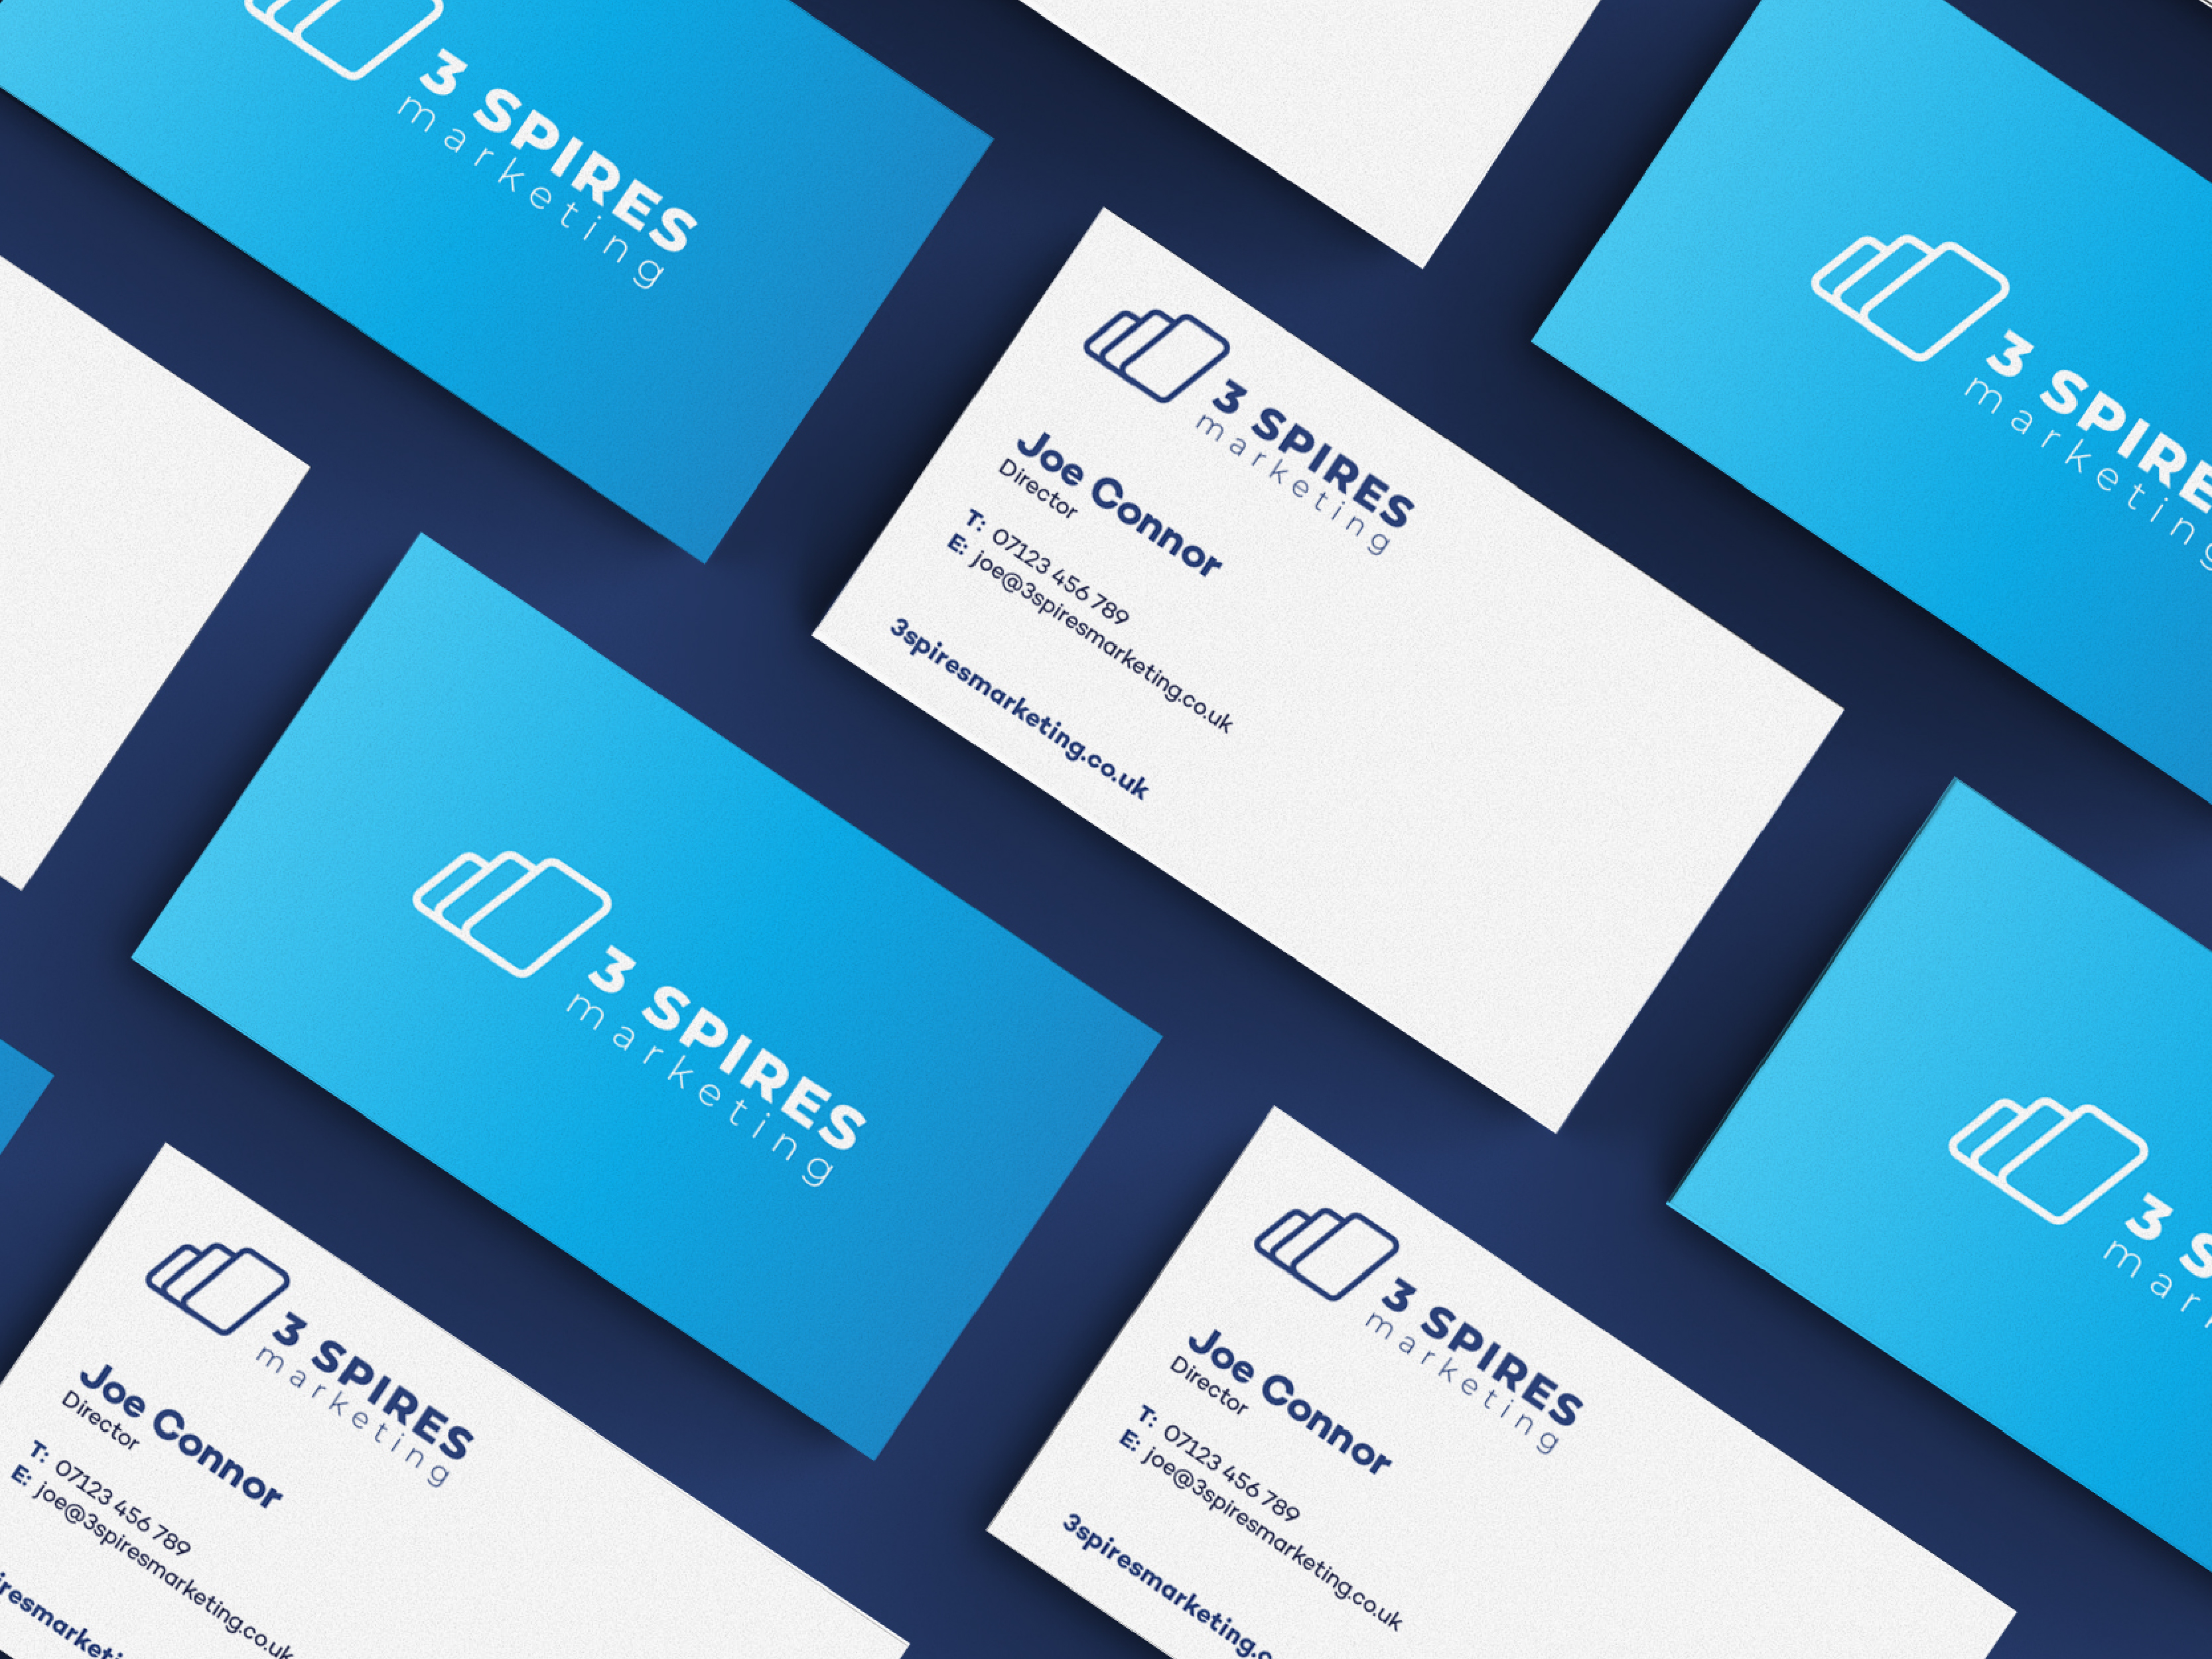 Business cards laying flat on a blue table